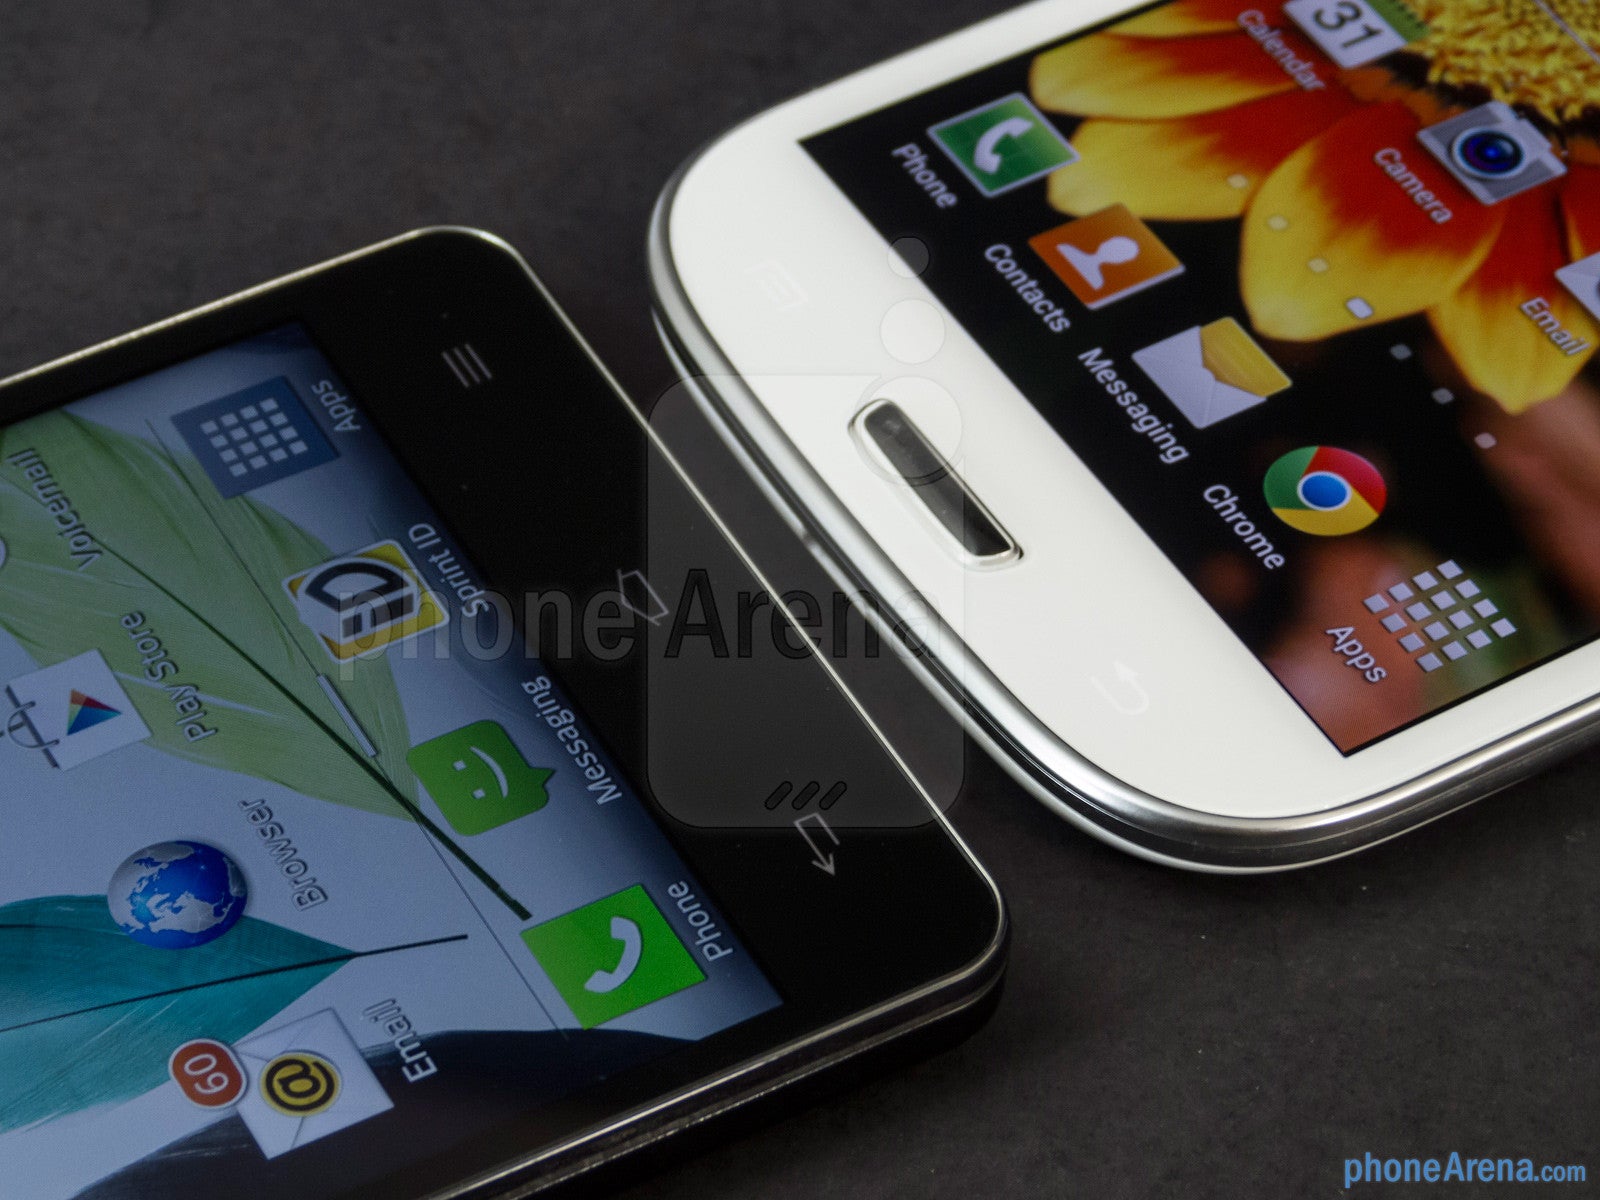 The capacitive buttons below the screens - LG Optimus G vs Samsung Galaxy S III